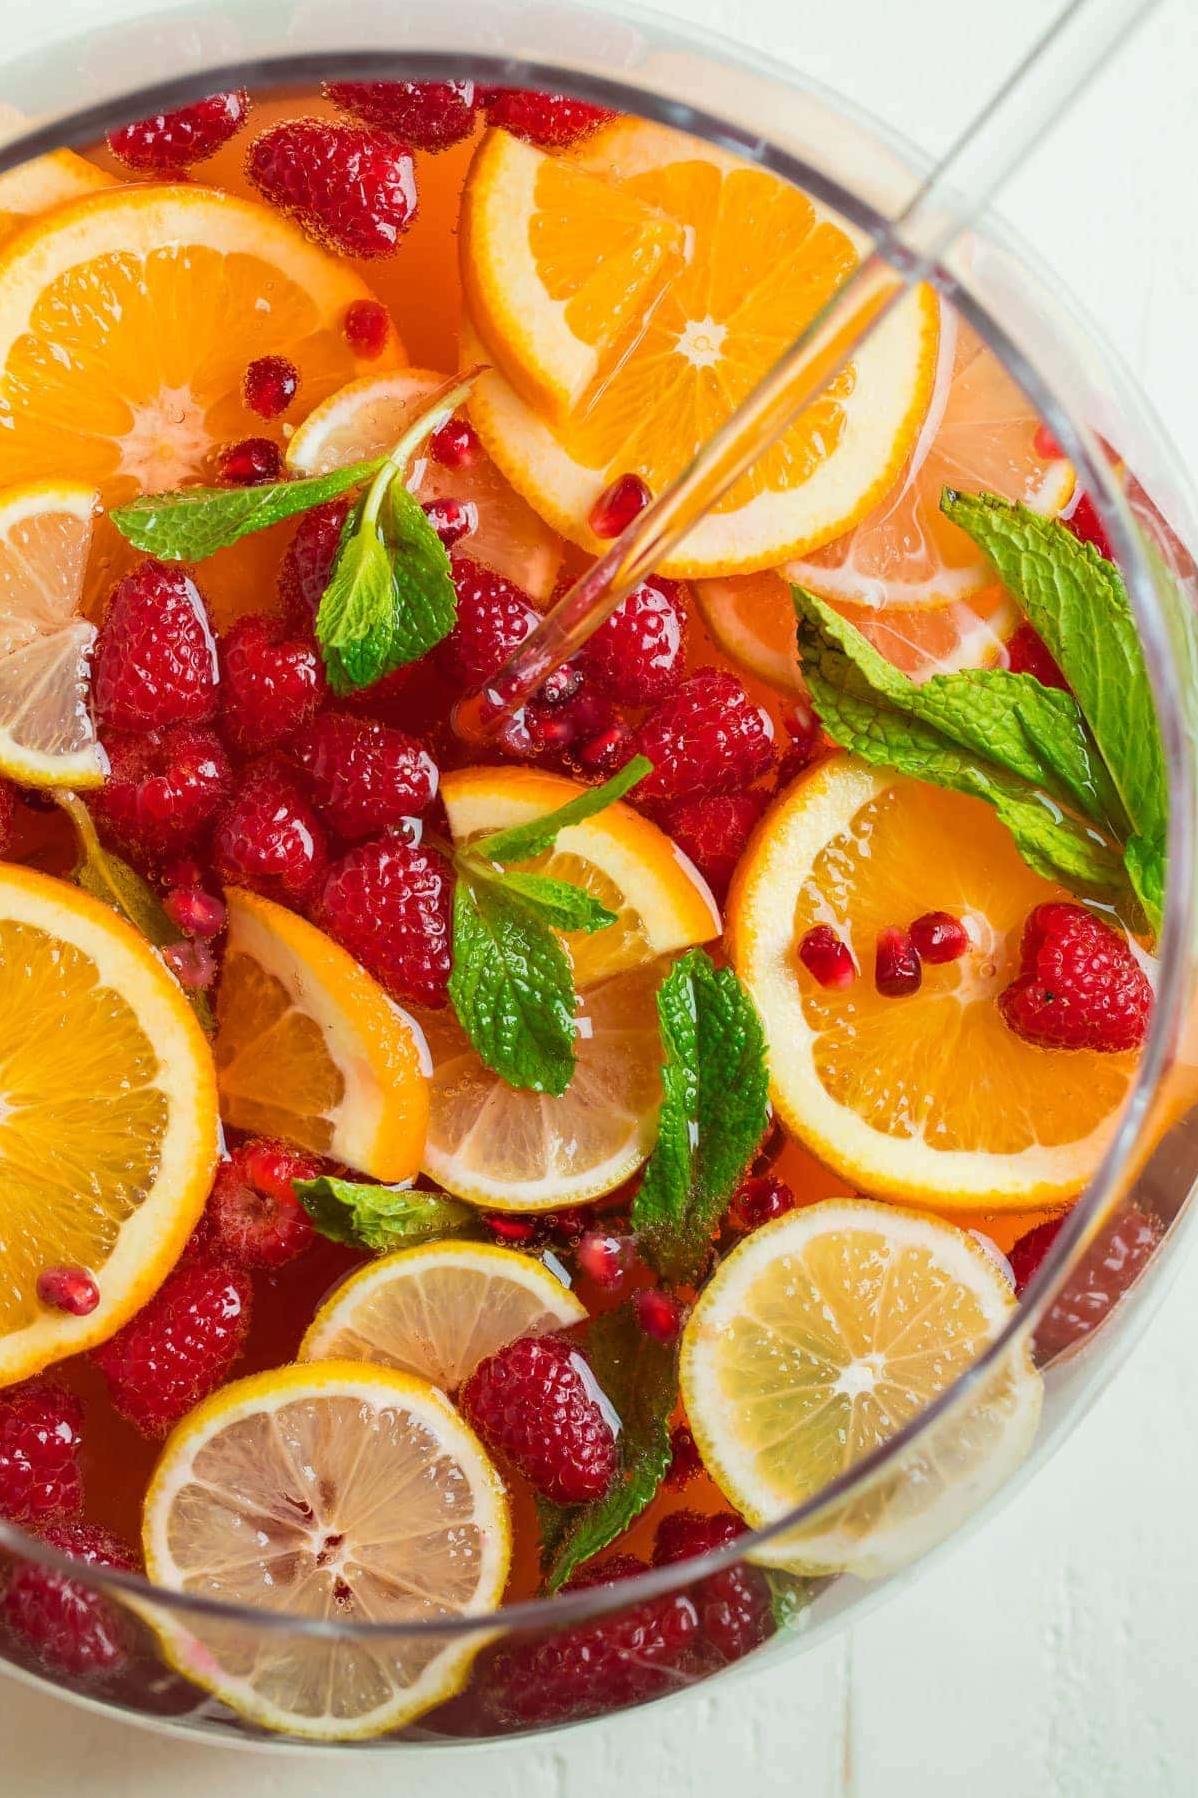  Just add champagne and voila, you've got yourself a fancy fruit salad.